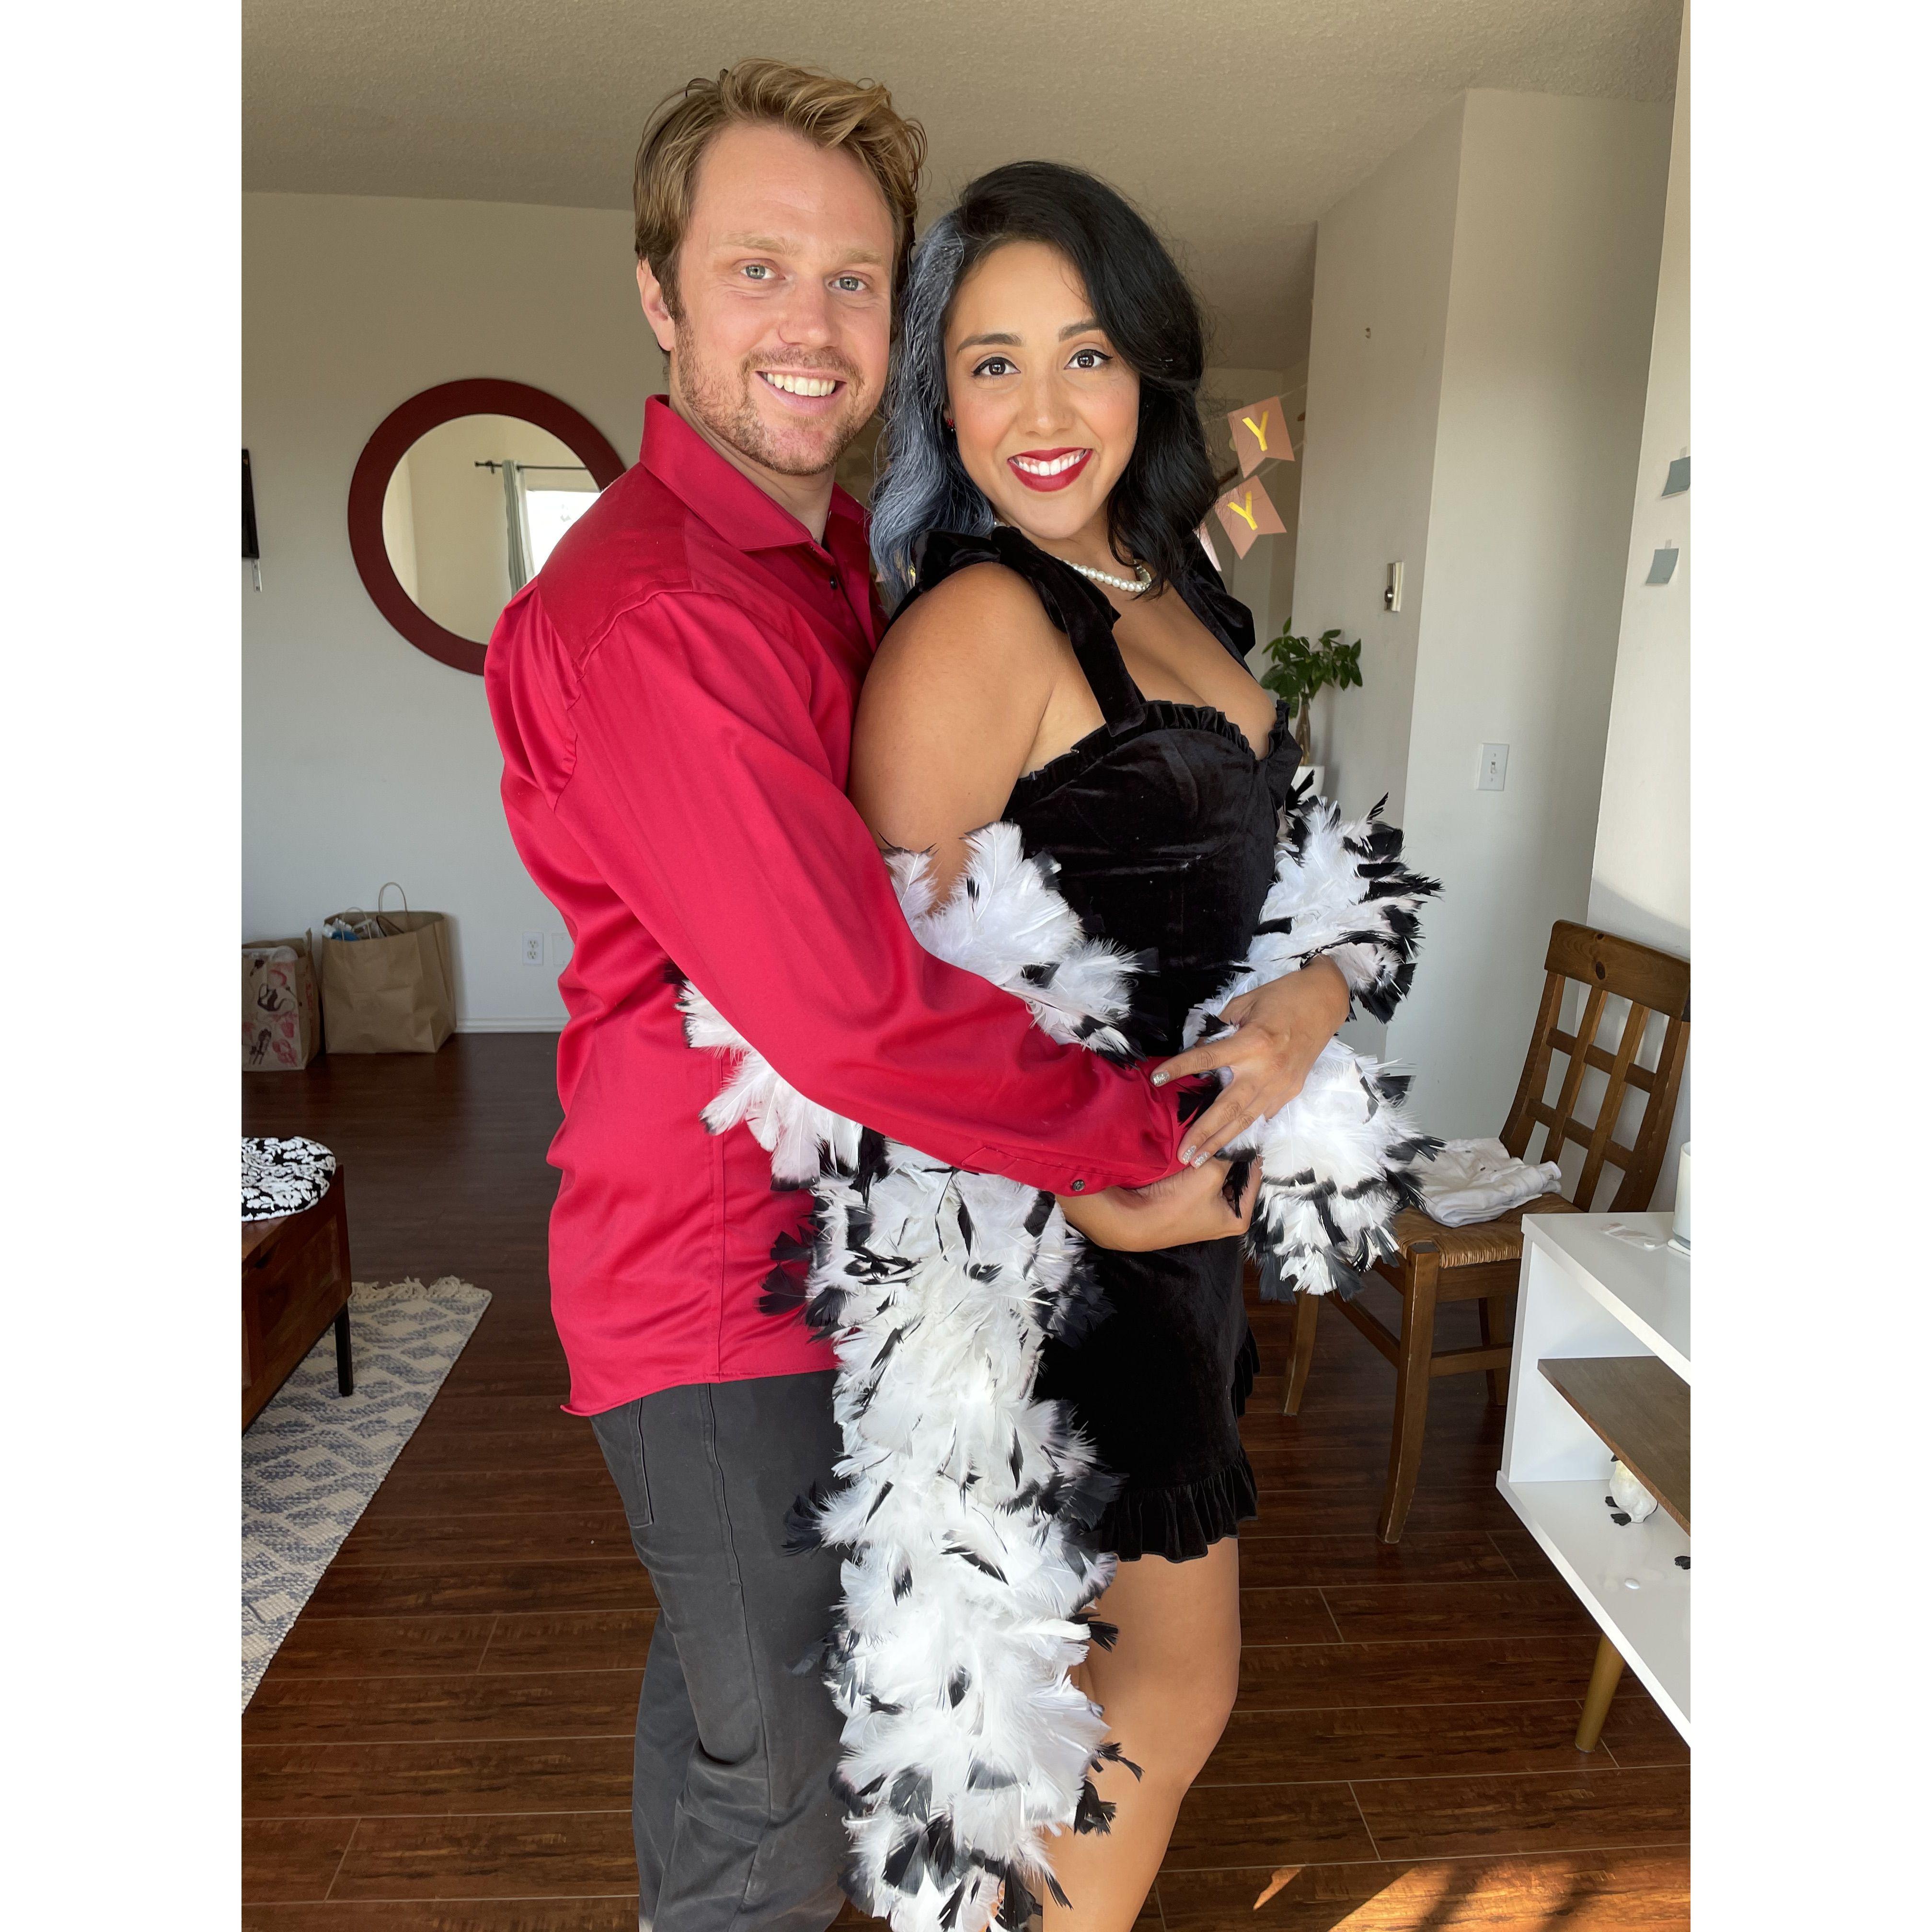 Going to watch CRUELLA for Chrisy's birthday with her girlfriends. She loves how willing Zach is to coordinate and dress in theme!